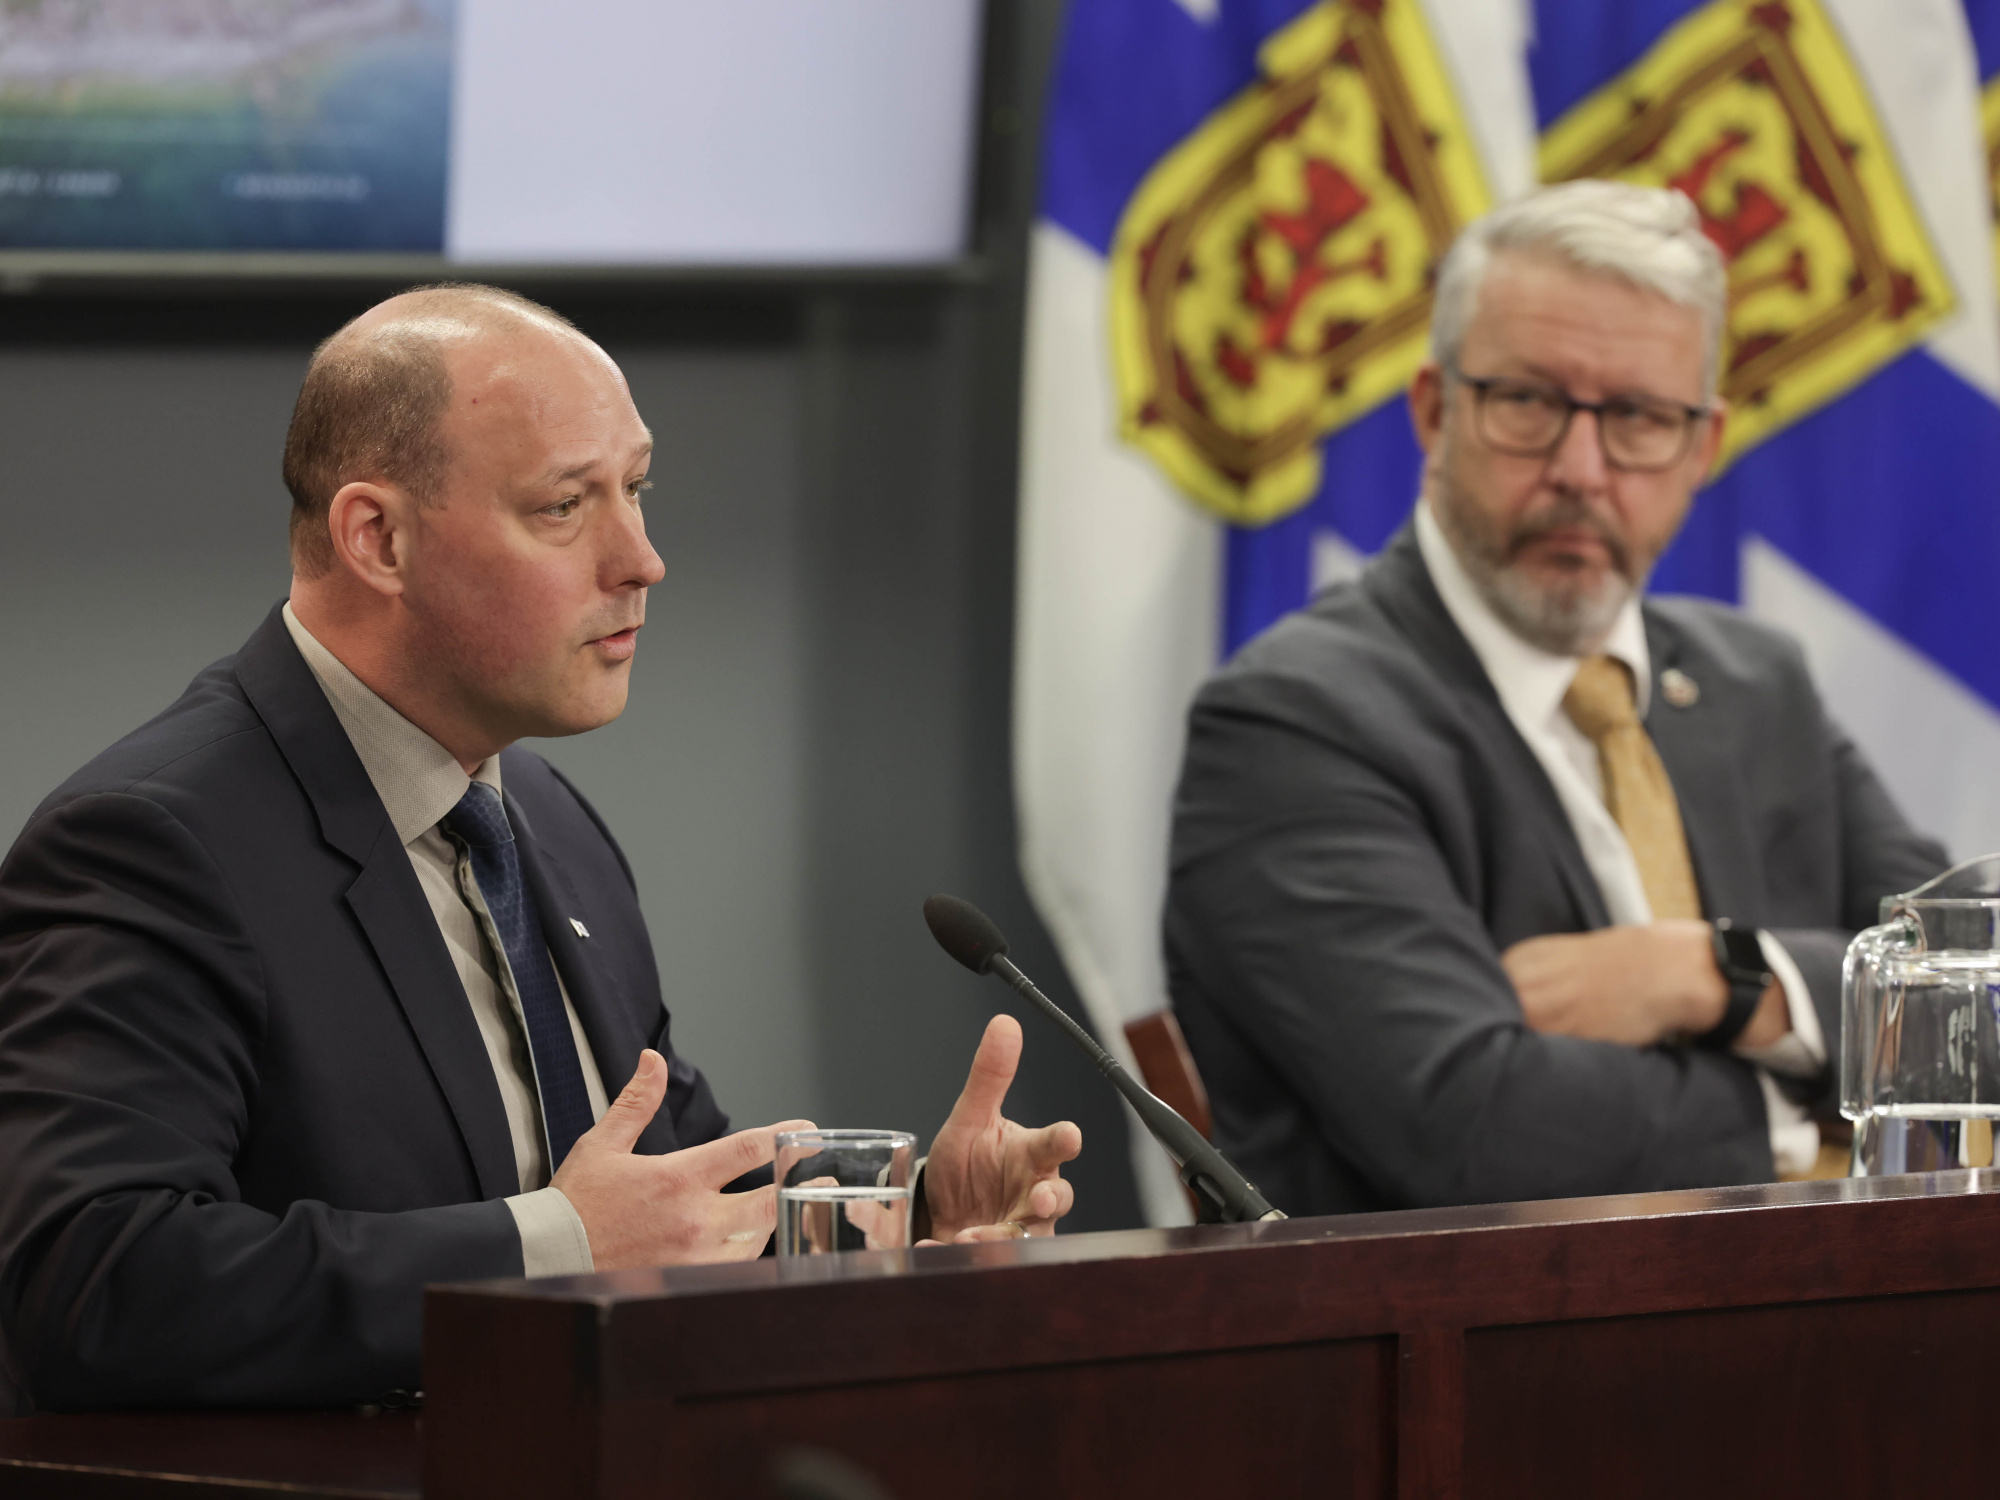 (L-R) Timothy Halman, Minister of Environment and Climate Change, and John Lohr, Minister of Municipal Affairs and Housing, during the release of the coastal protection action plan. (Communications Nova Scotia)